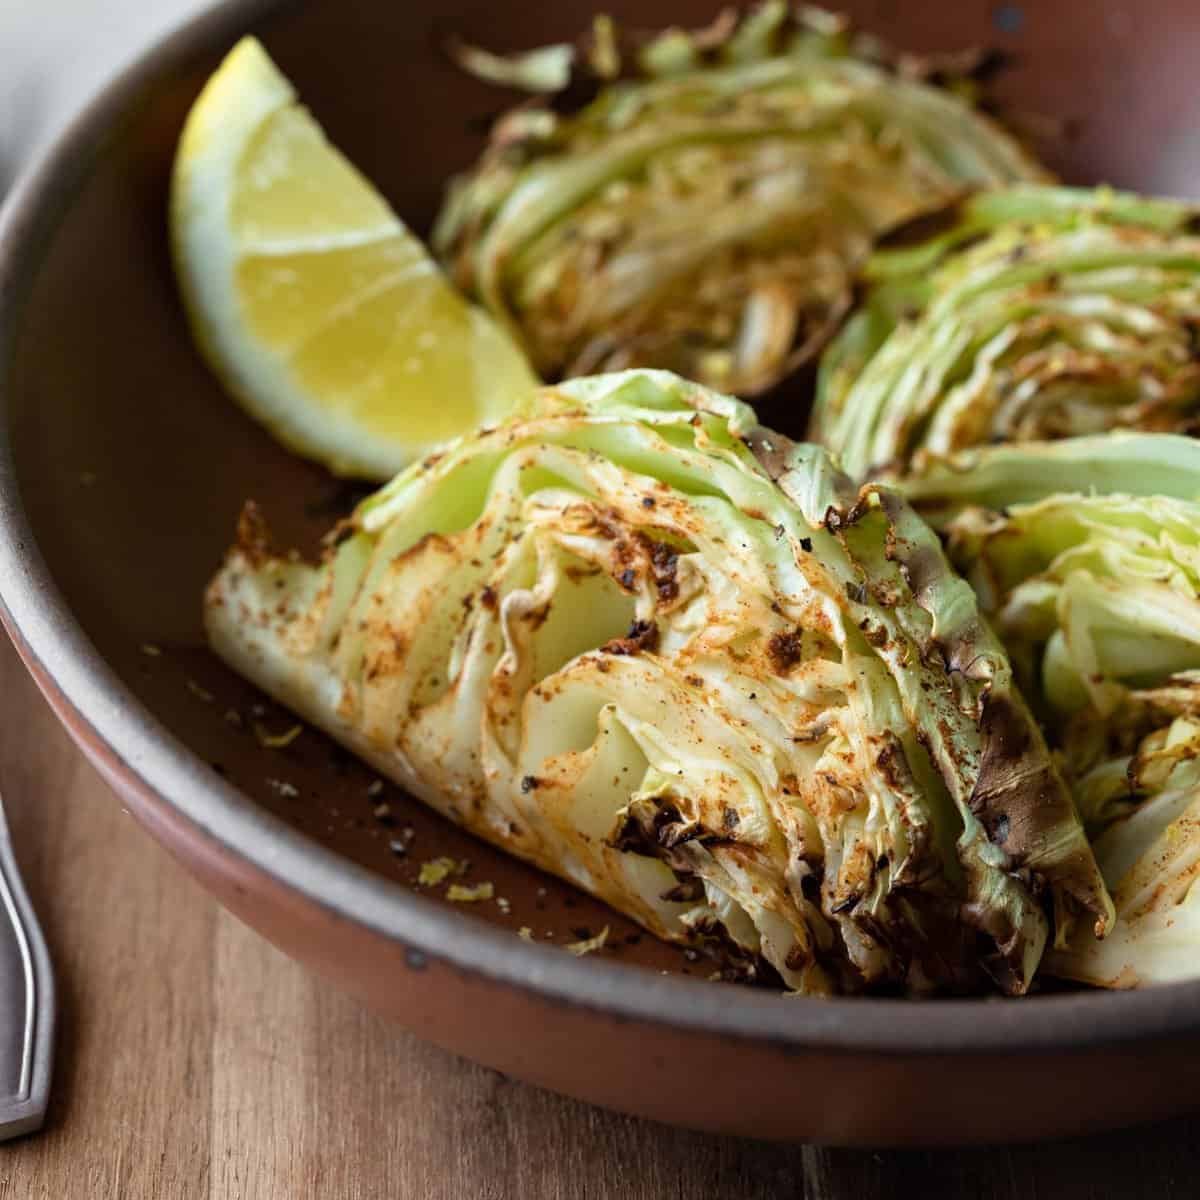 A close-up shot of air-fried cabbage wedges in a red bowl.